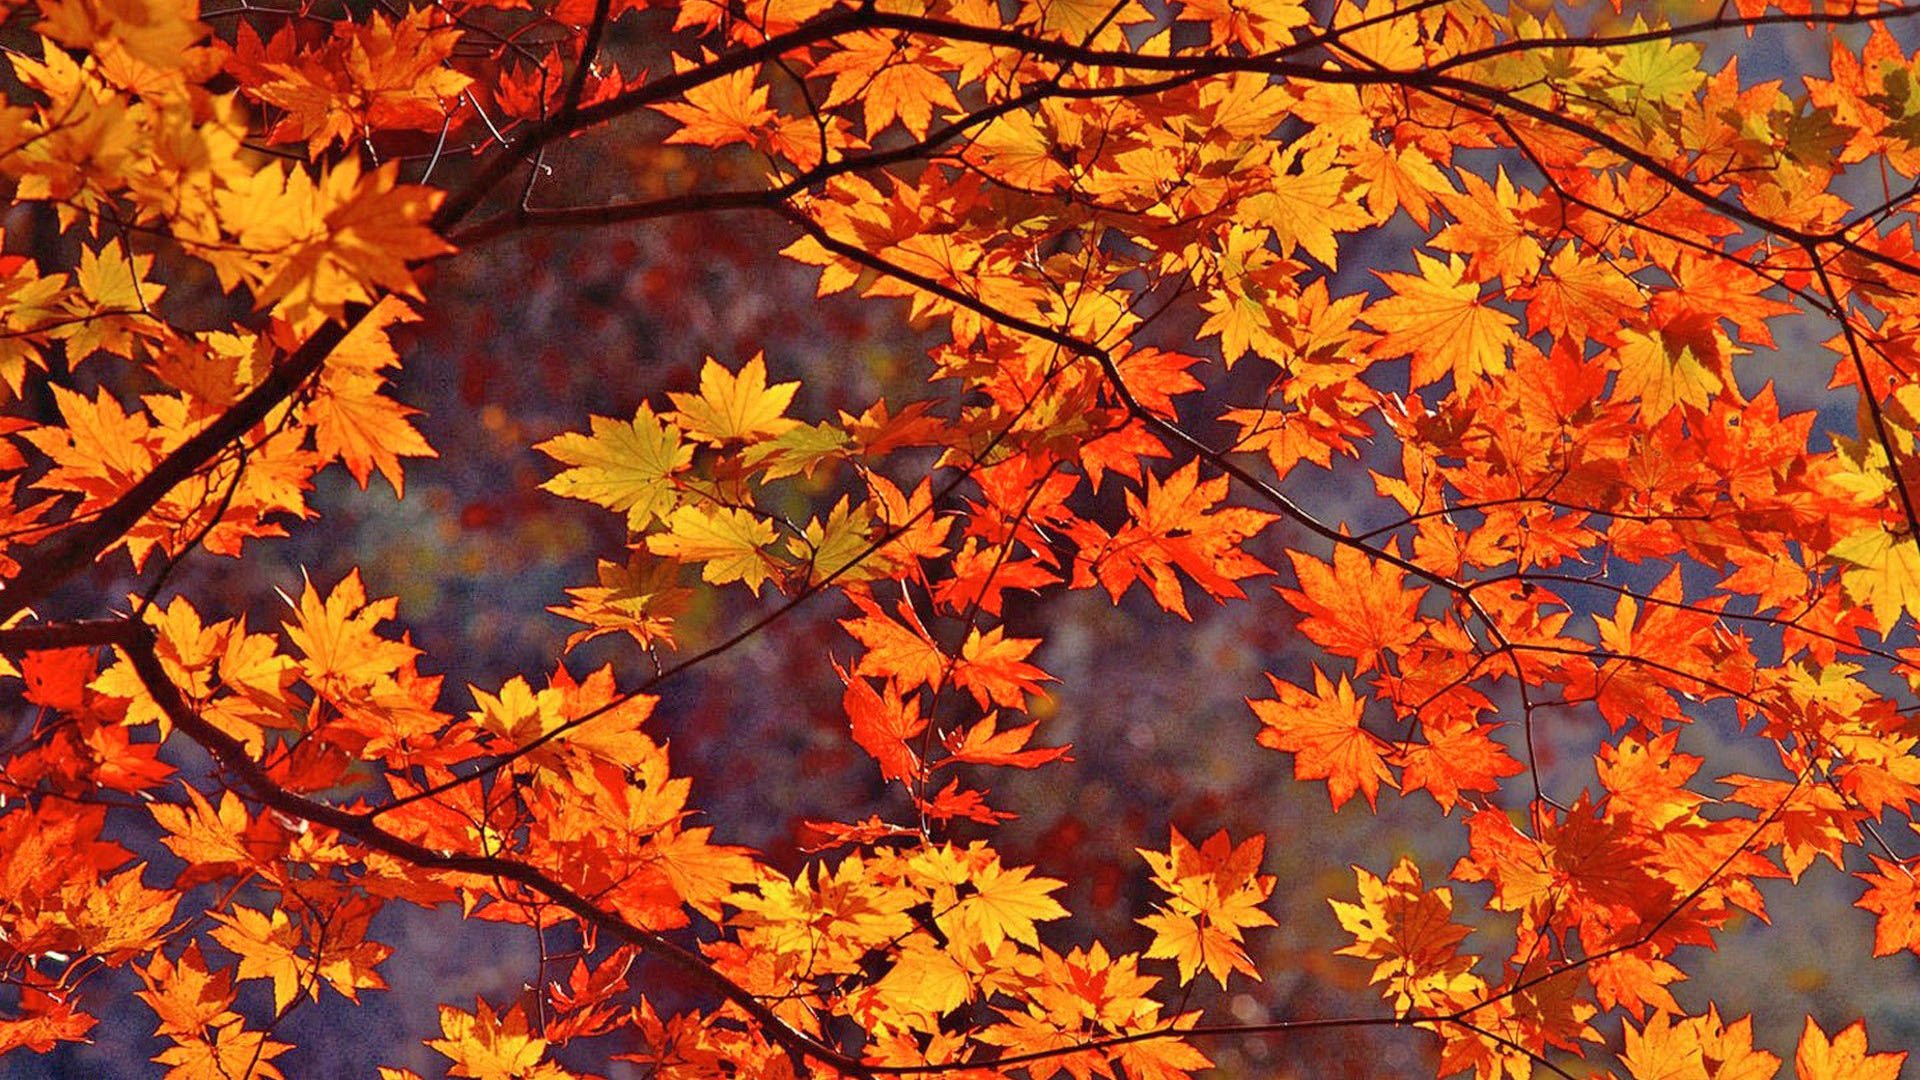 Autumn Leaves Background Wallpaper 1920x1080